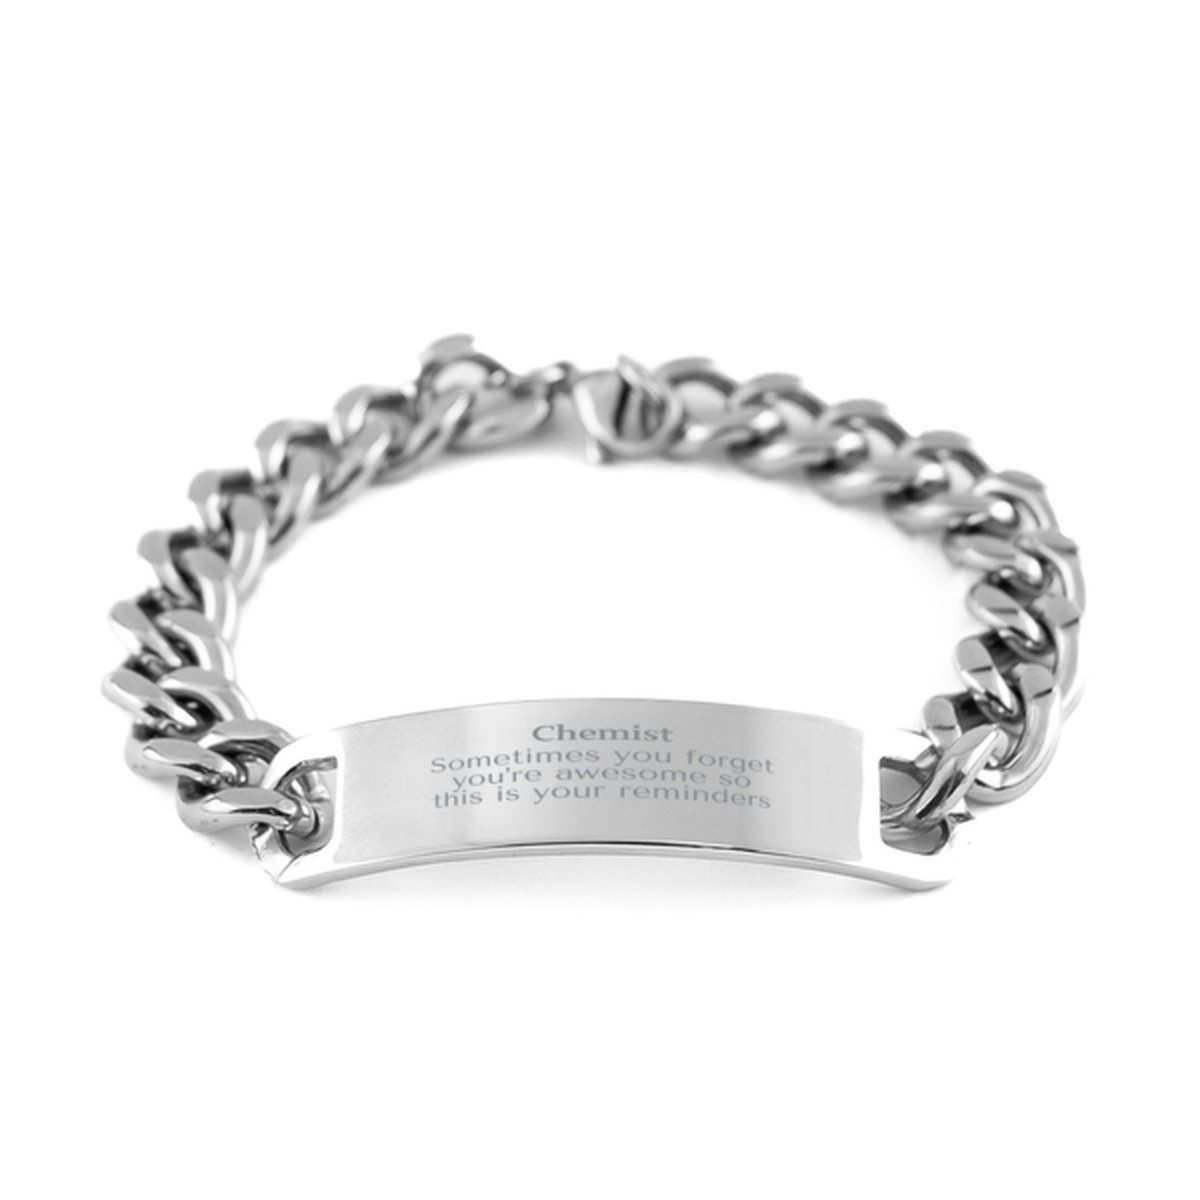 Sentimental Chemist Cuban Chain Stainless Steel Bracelet, Chemist Sometimes you forget you're awesome so this is your reminders, Graduation Christmas Birthday Gifts for Chemist, Men, Women, Coworkers